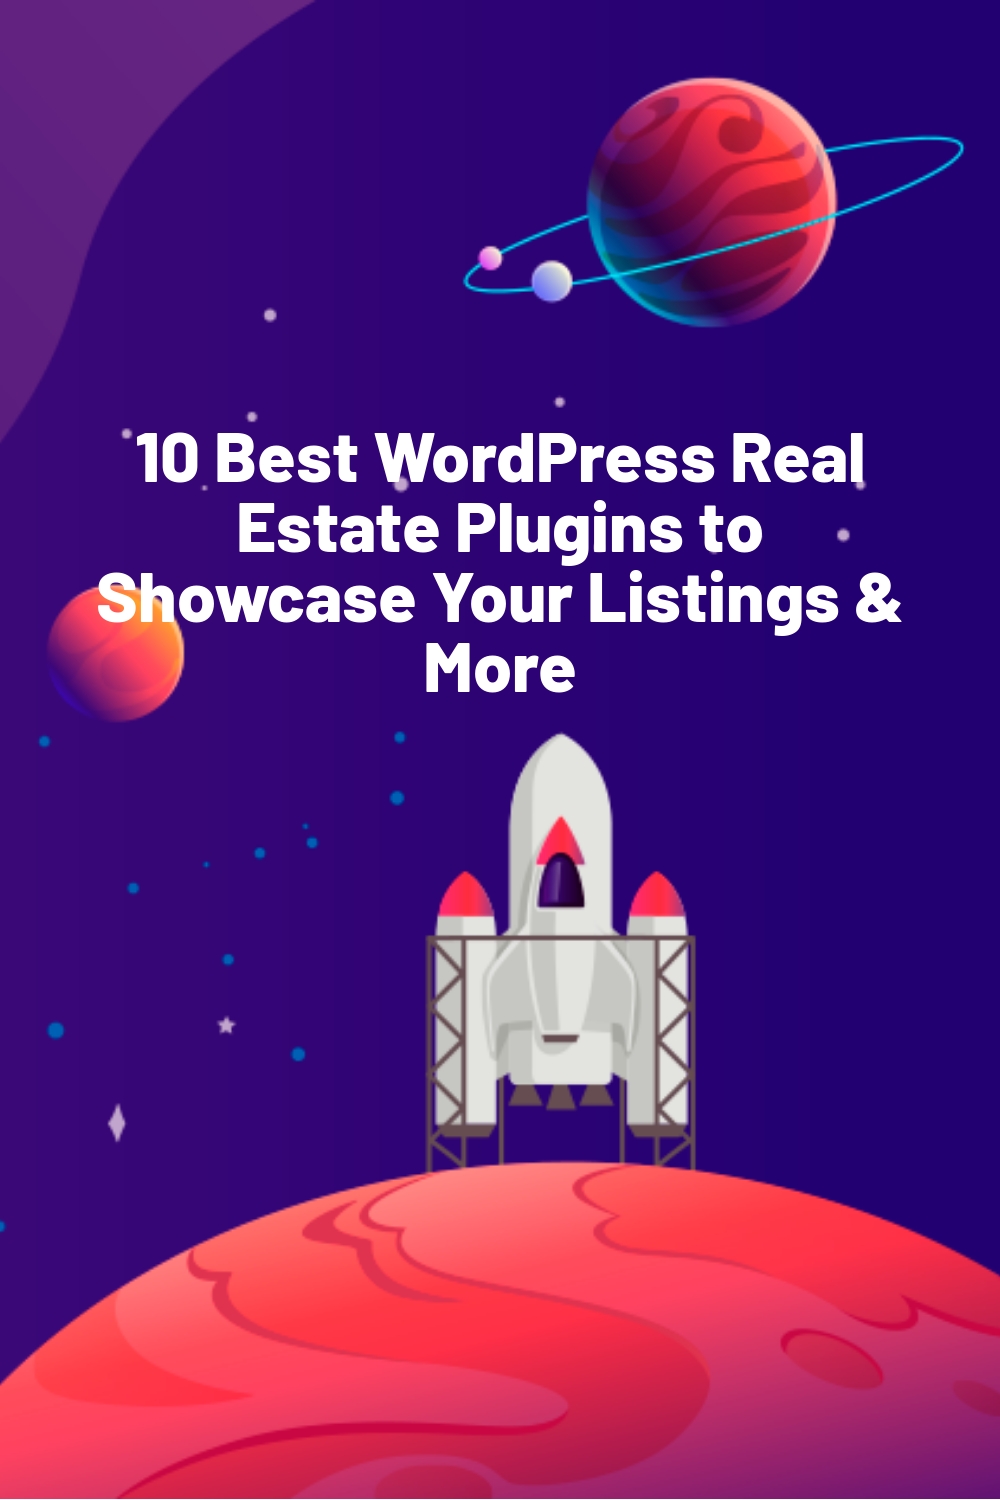 10 Best WordPress Real Estate Plugins to Showcase Your Listings & More